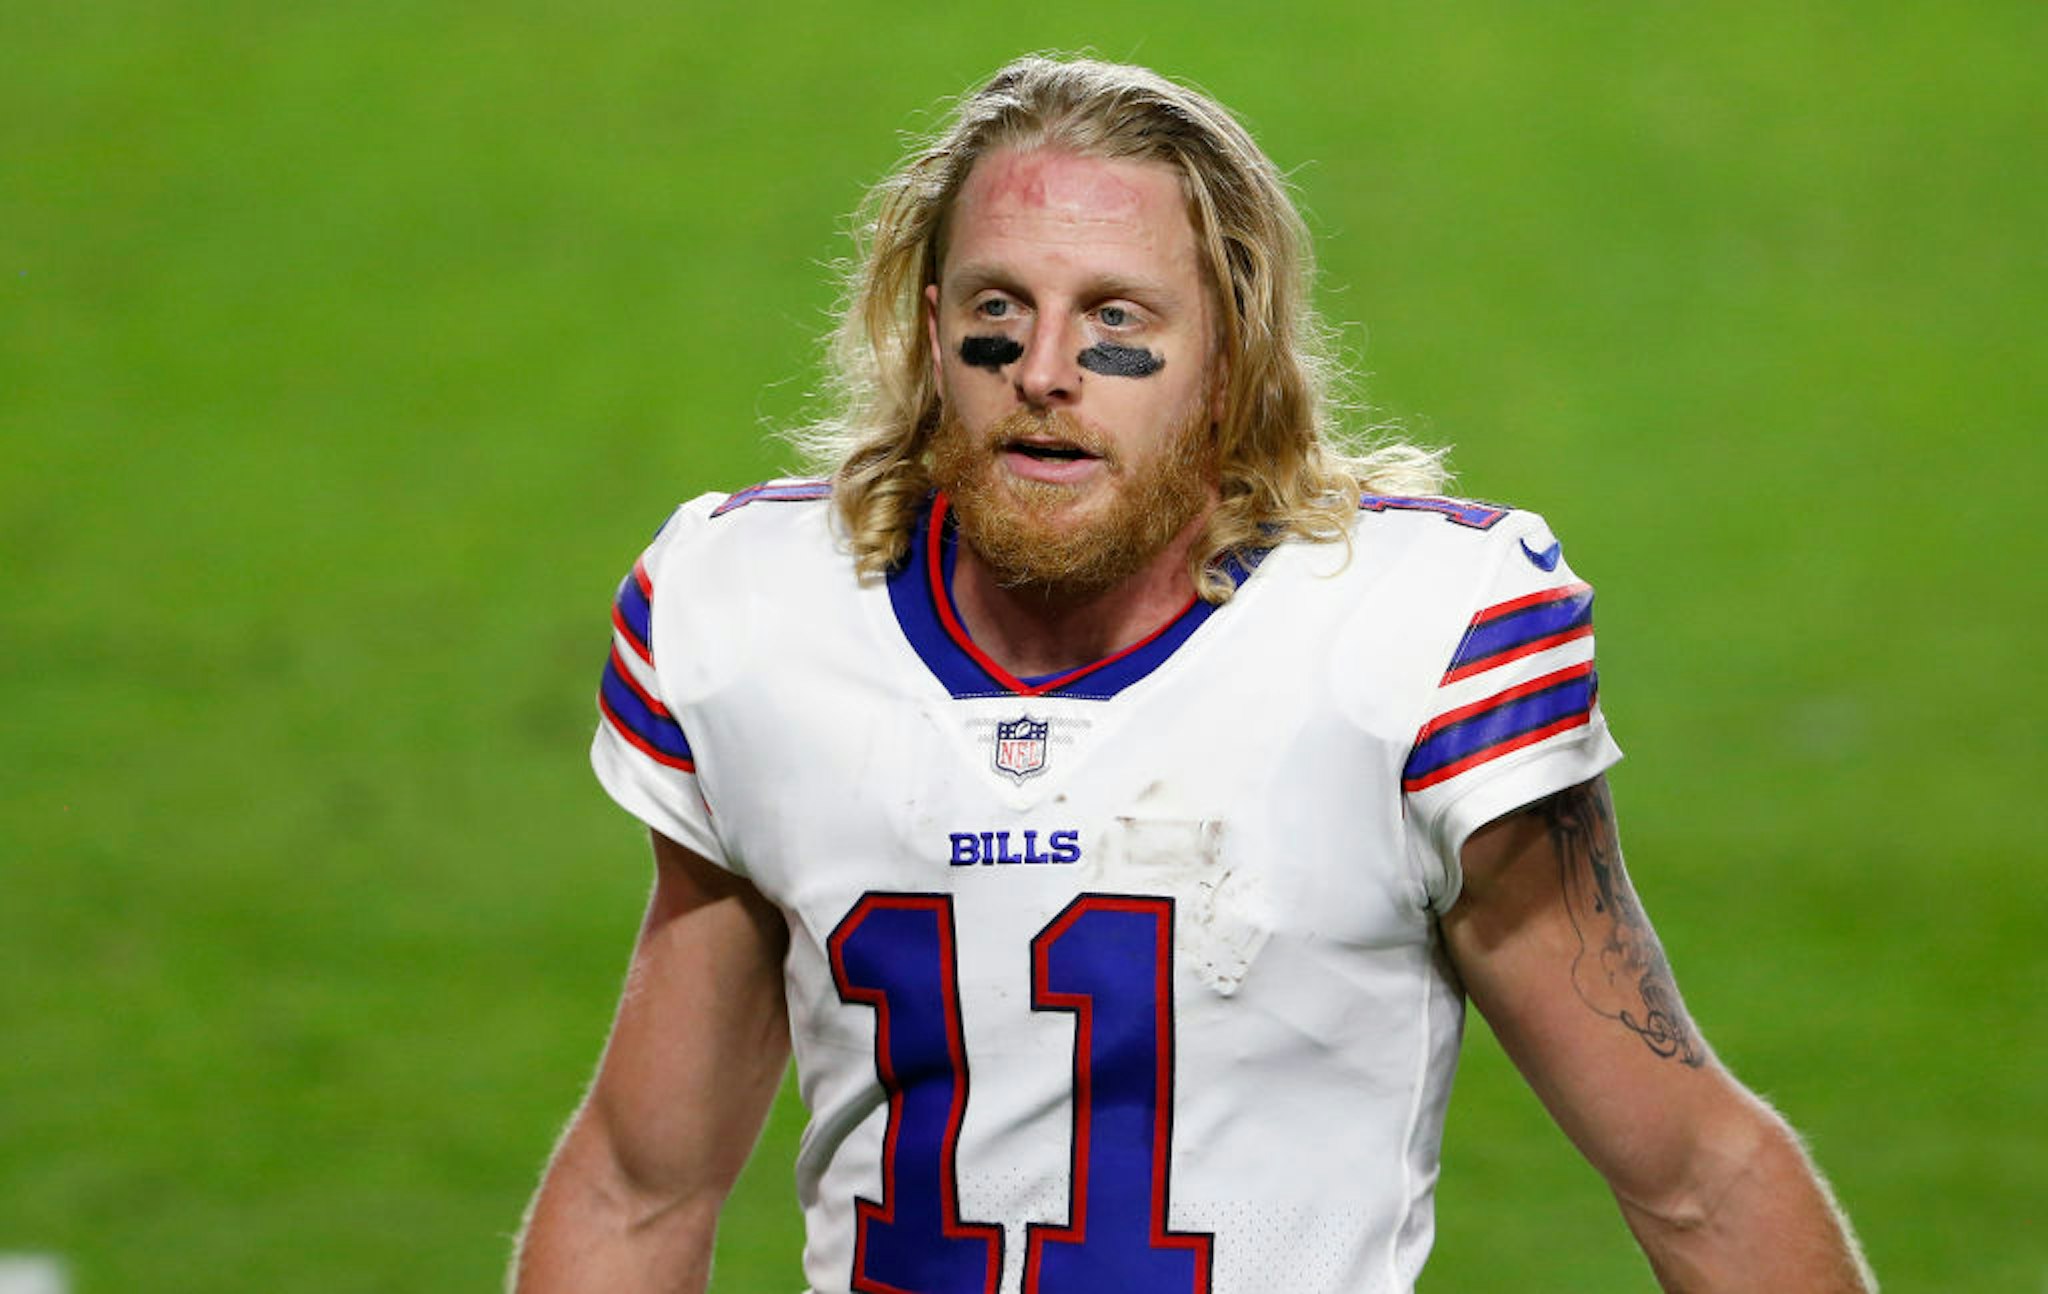 Wide receiver Cole Beasley #11 of the Buffalo Bills during the NFL football game against the San Francisco 49ers at State Farm Stadium on December 07, 2020 in Glendale, Arizona.